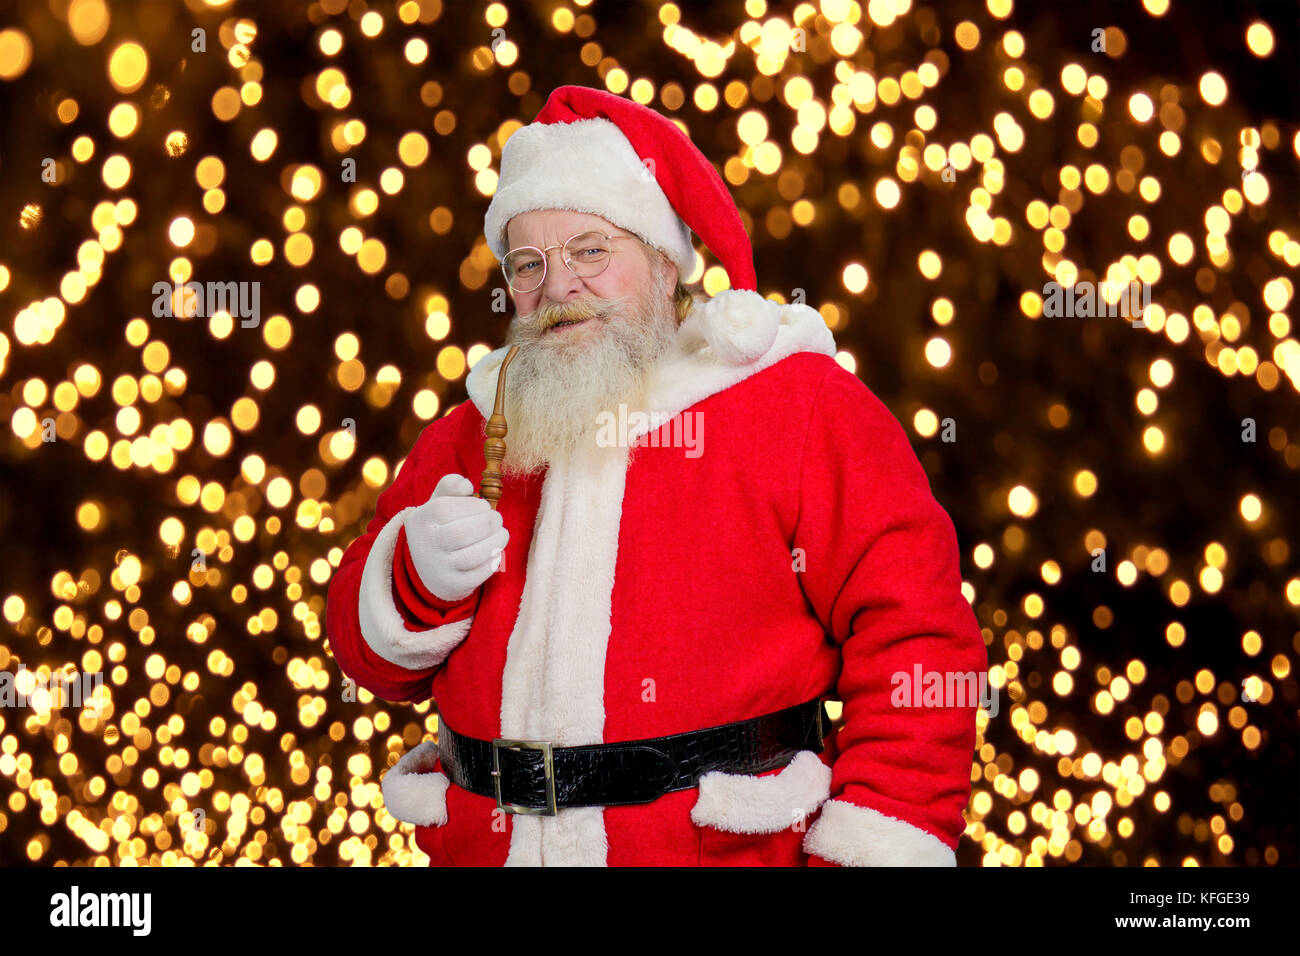 Santa Claus with pipe, portrait. Authentic Santa Claus with smoking pipe on New Year lights background. Stock Photo